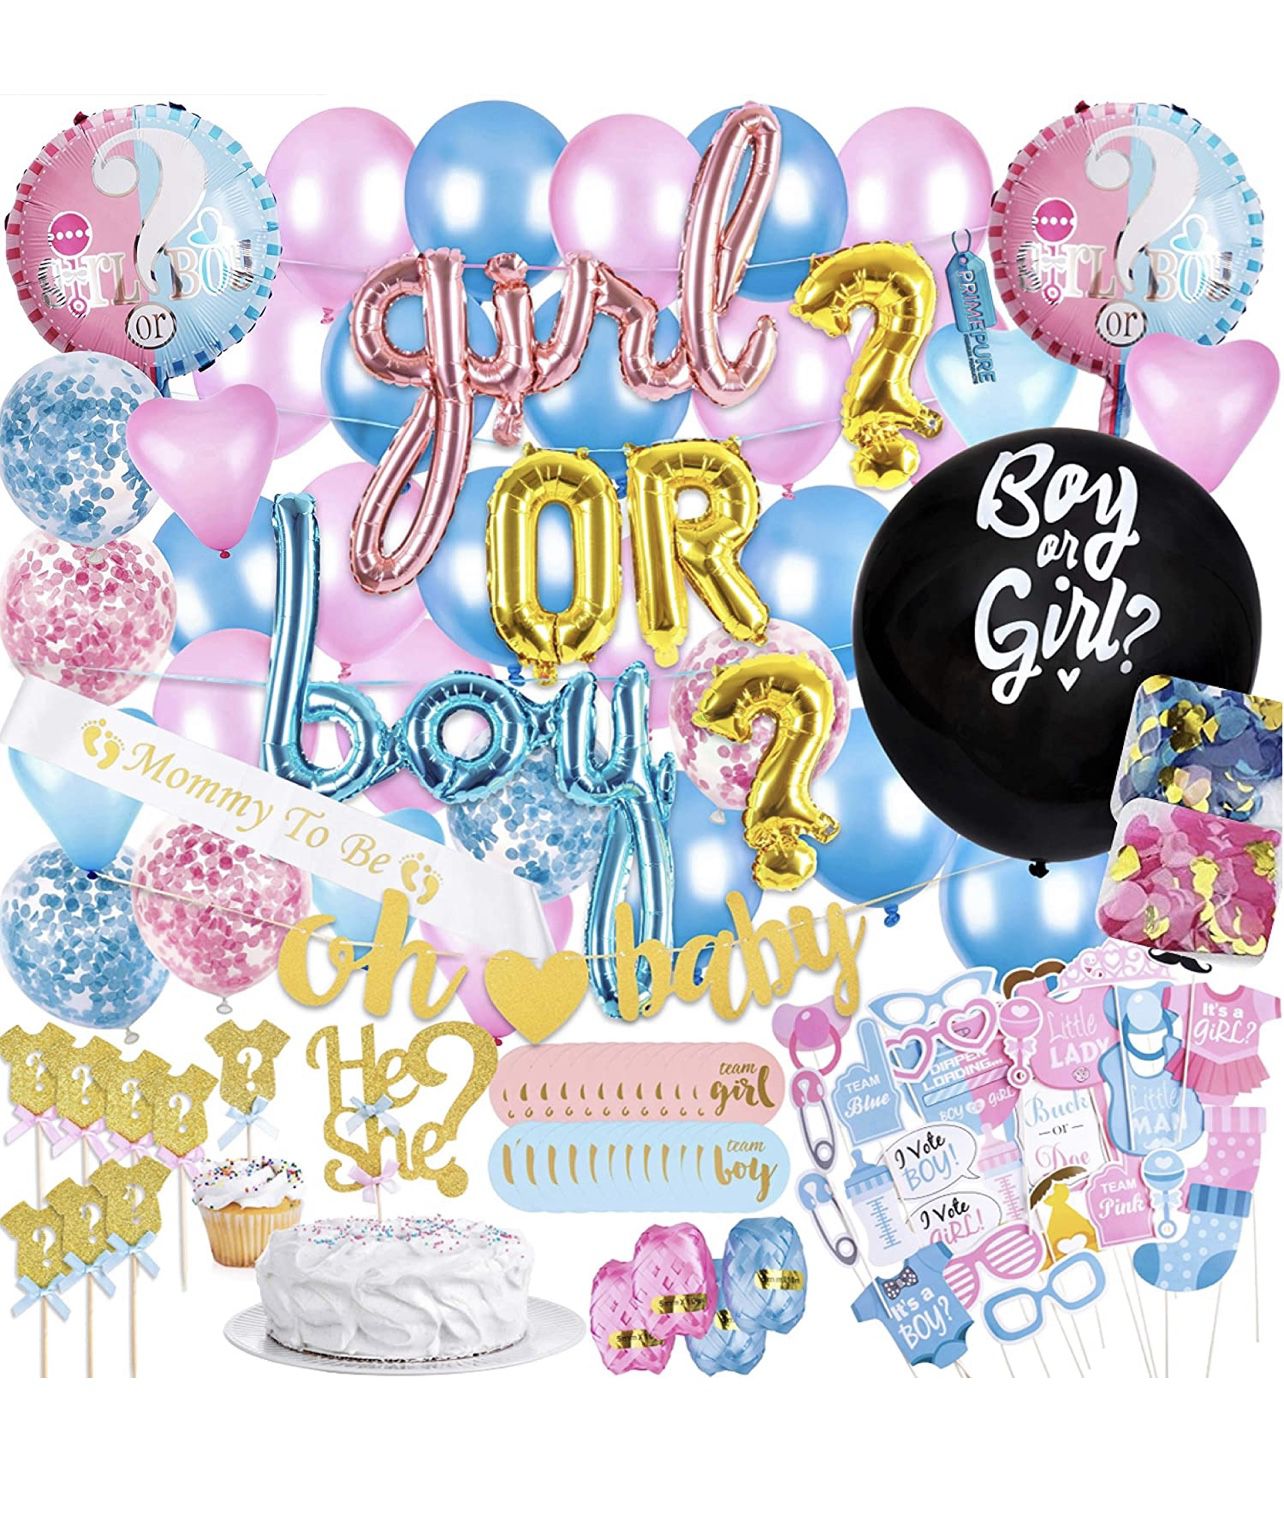 Brand New Baby Gender Reveal Party Supplies and Decorations (111 Piece Premium Kit) Pink and Blue Balloons, 36 inch Gender Reveal Balloon, Boy or Girl